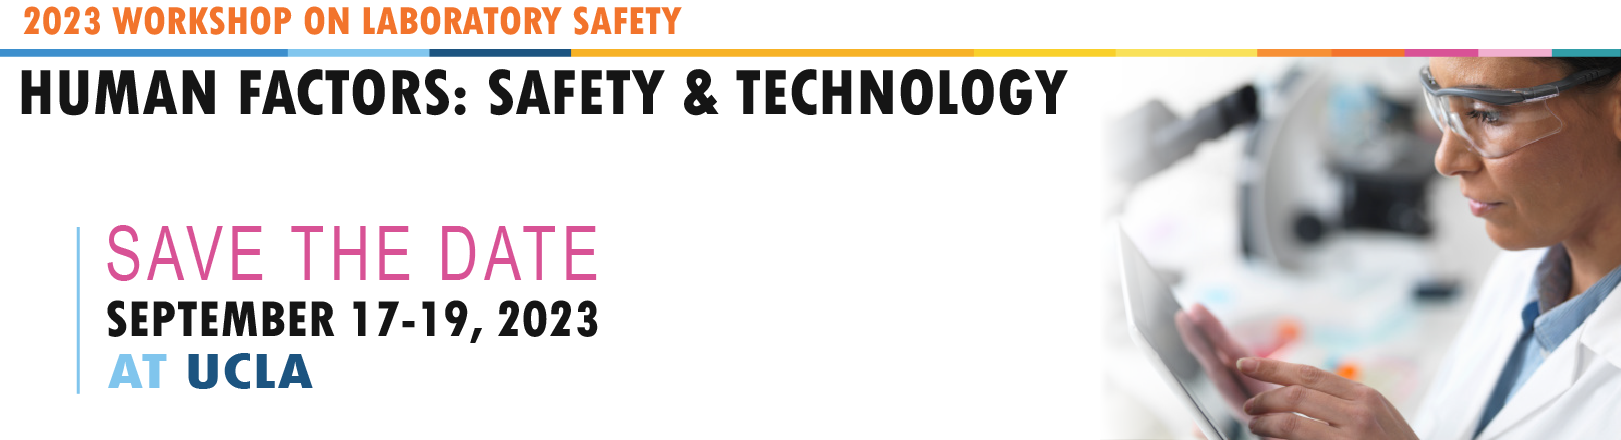 Save the Date for the 2023 Workshop on lab safety! The theme is Human Factors: Safety and Technology and it will be from September 17-19th, 2023 on the UCLA campus.